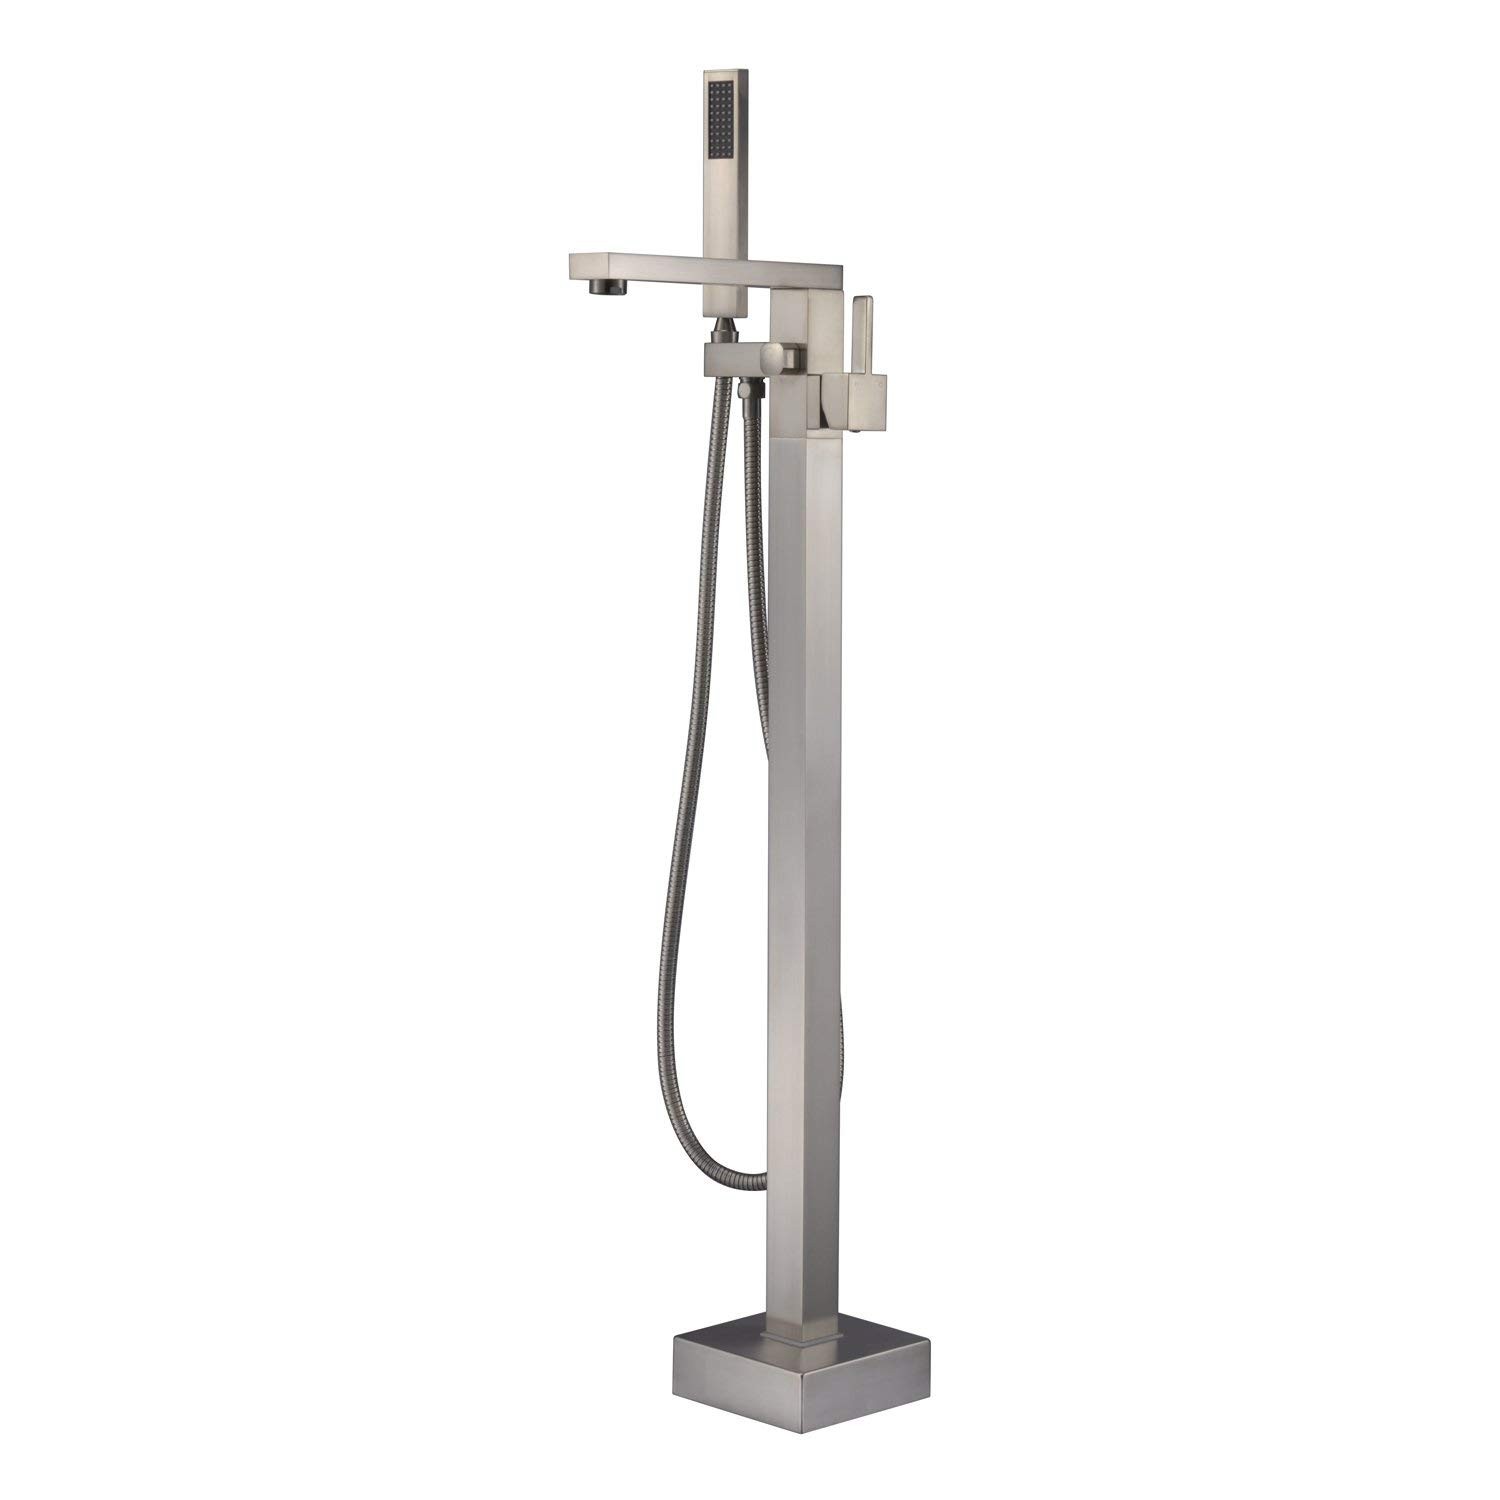  WOODBRIDGE F0003BN Contemporary Single Handle Floor Mount Freestanding Tub Filler Faucet with Hand shower in Brushed Nickel Finish._10666